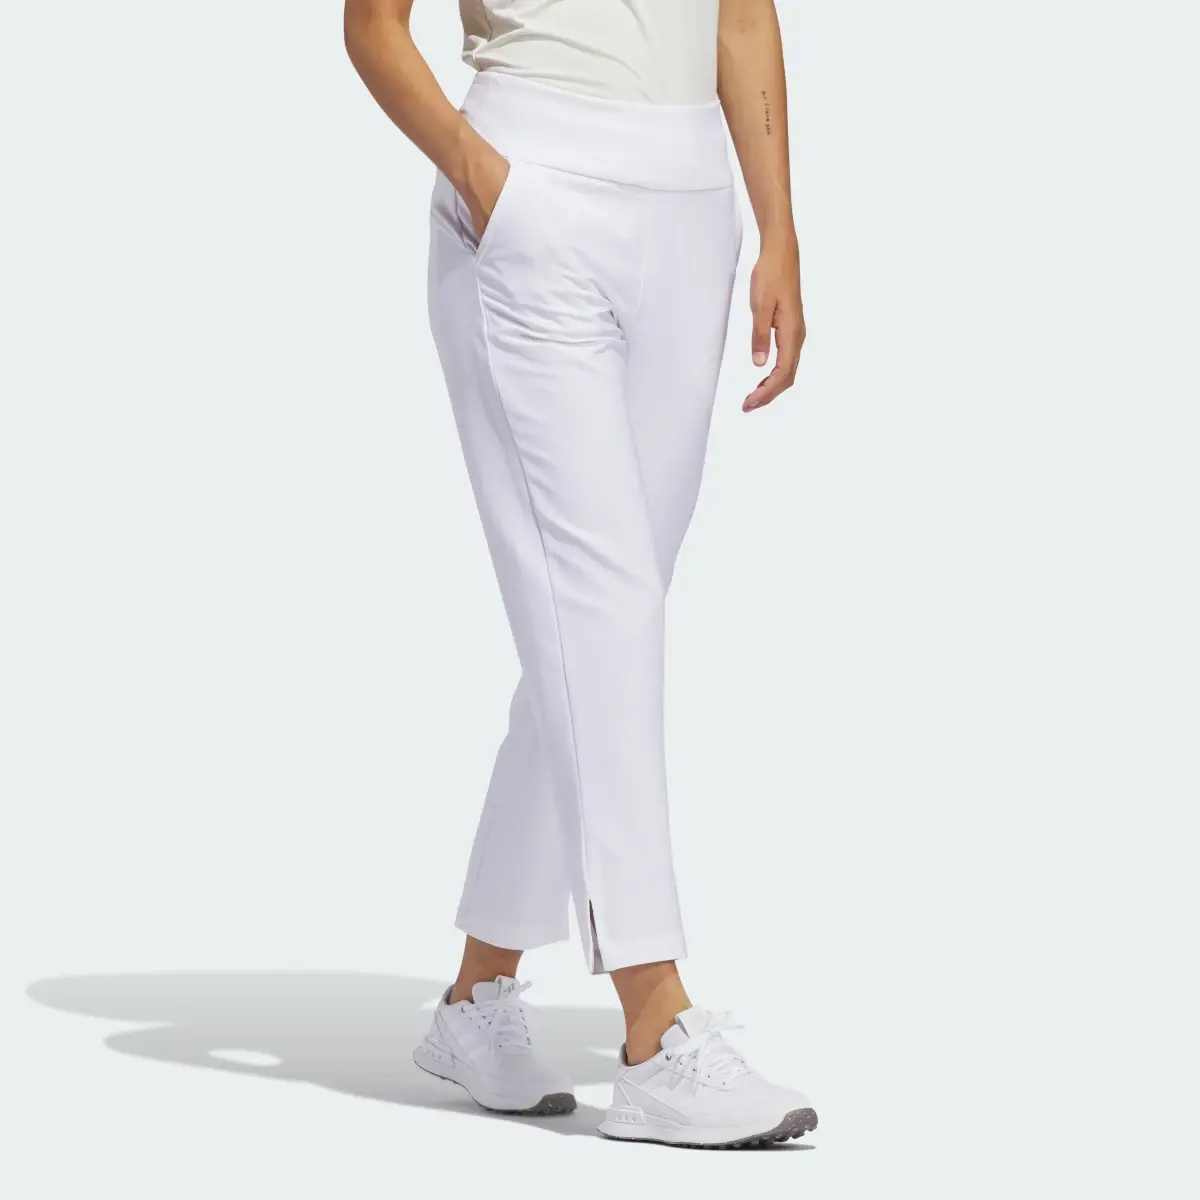 Adidas Ultimate365 Solid Ankle Trousers. 3